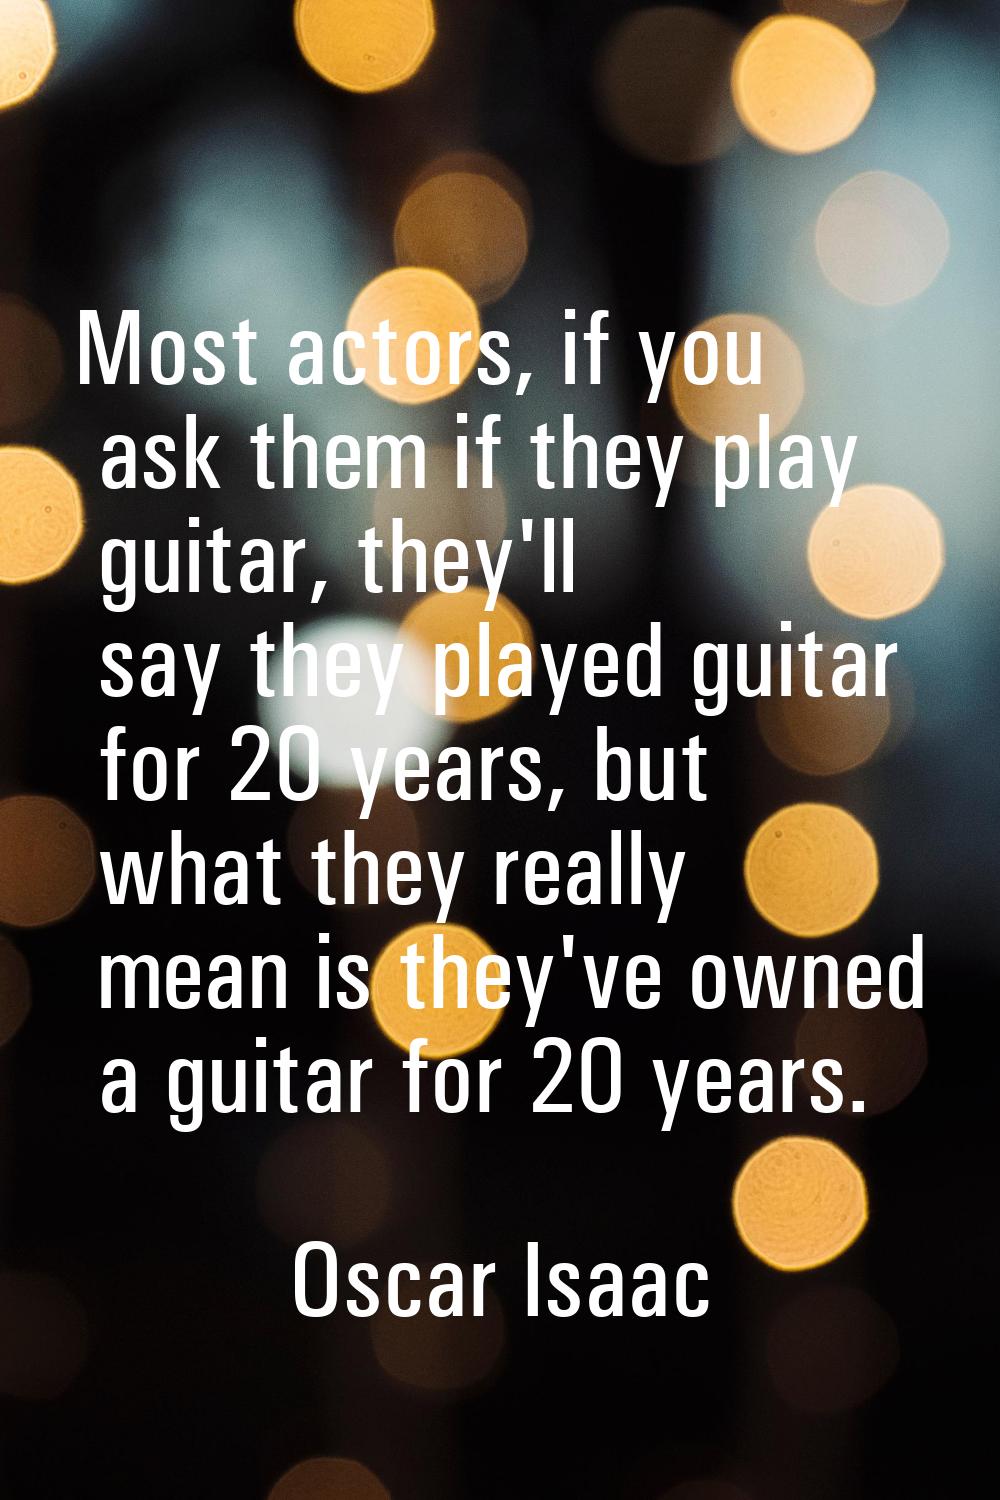 Most actors, if you ask them if they play guitar, they'll say they played guitar for 20 years, but 